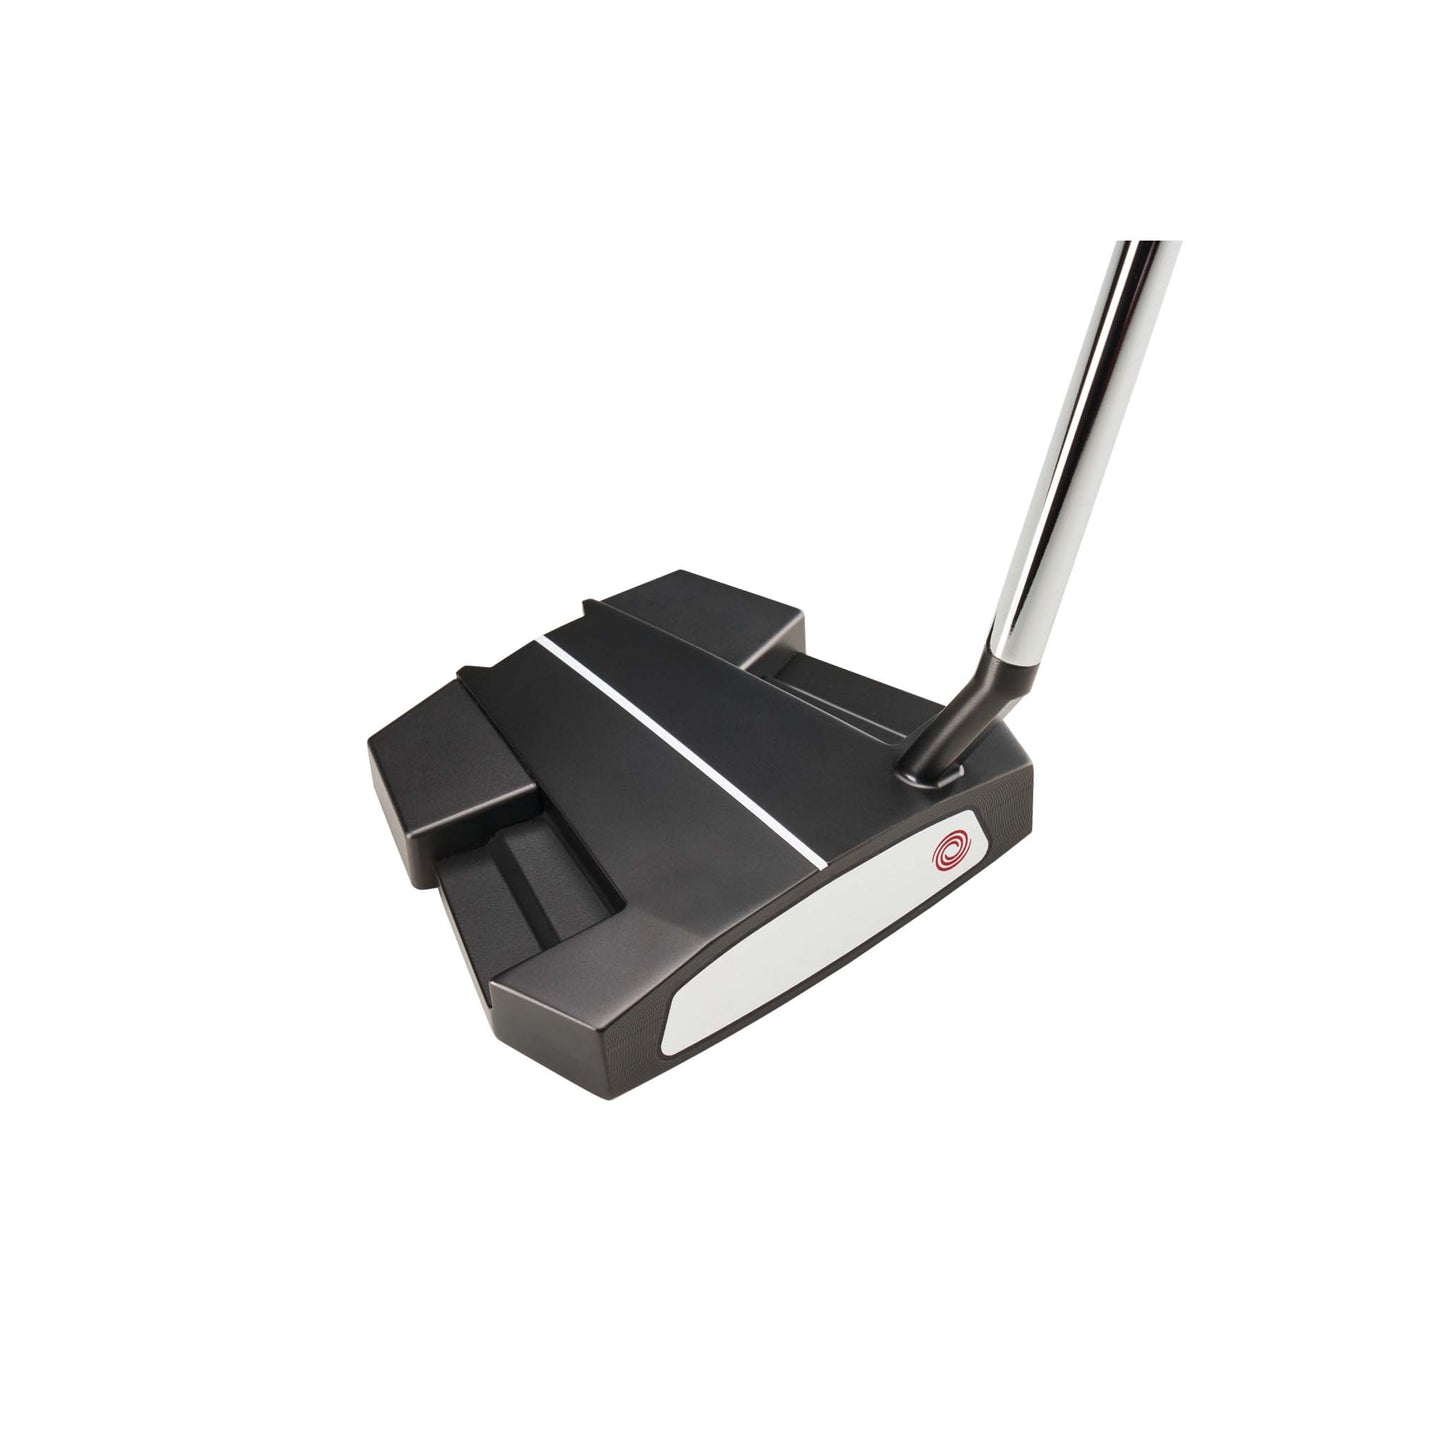 Odyssey Eleven Tour Lined S putteri